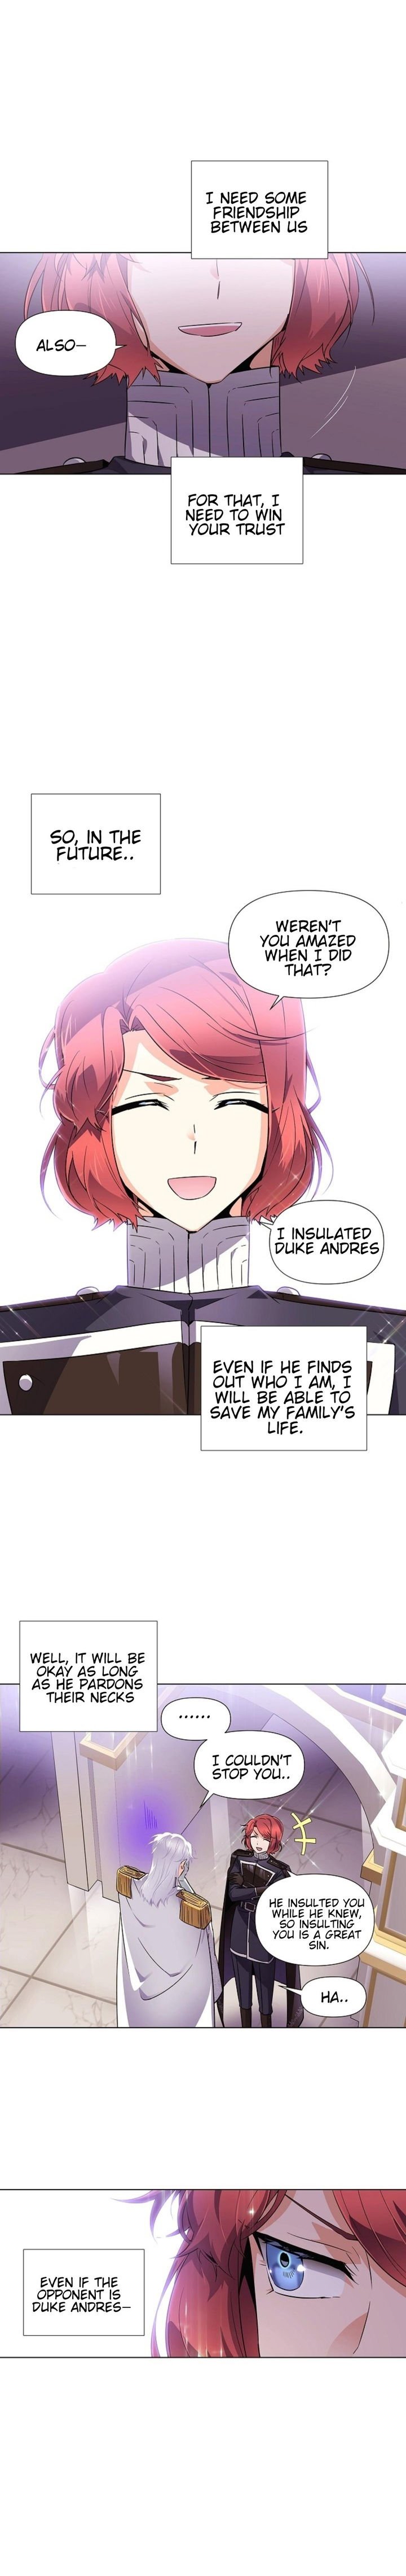 the-villain-discovered-my-identity-chap-38-3